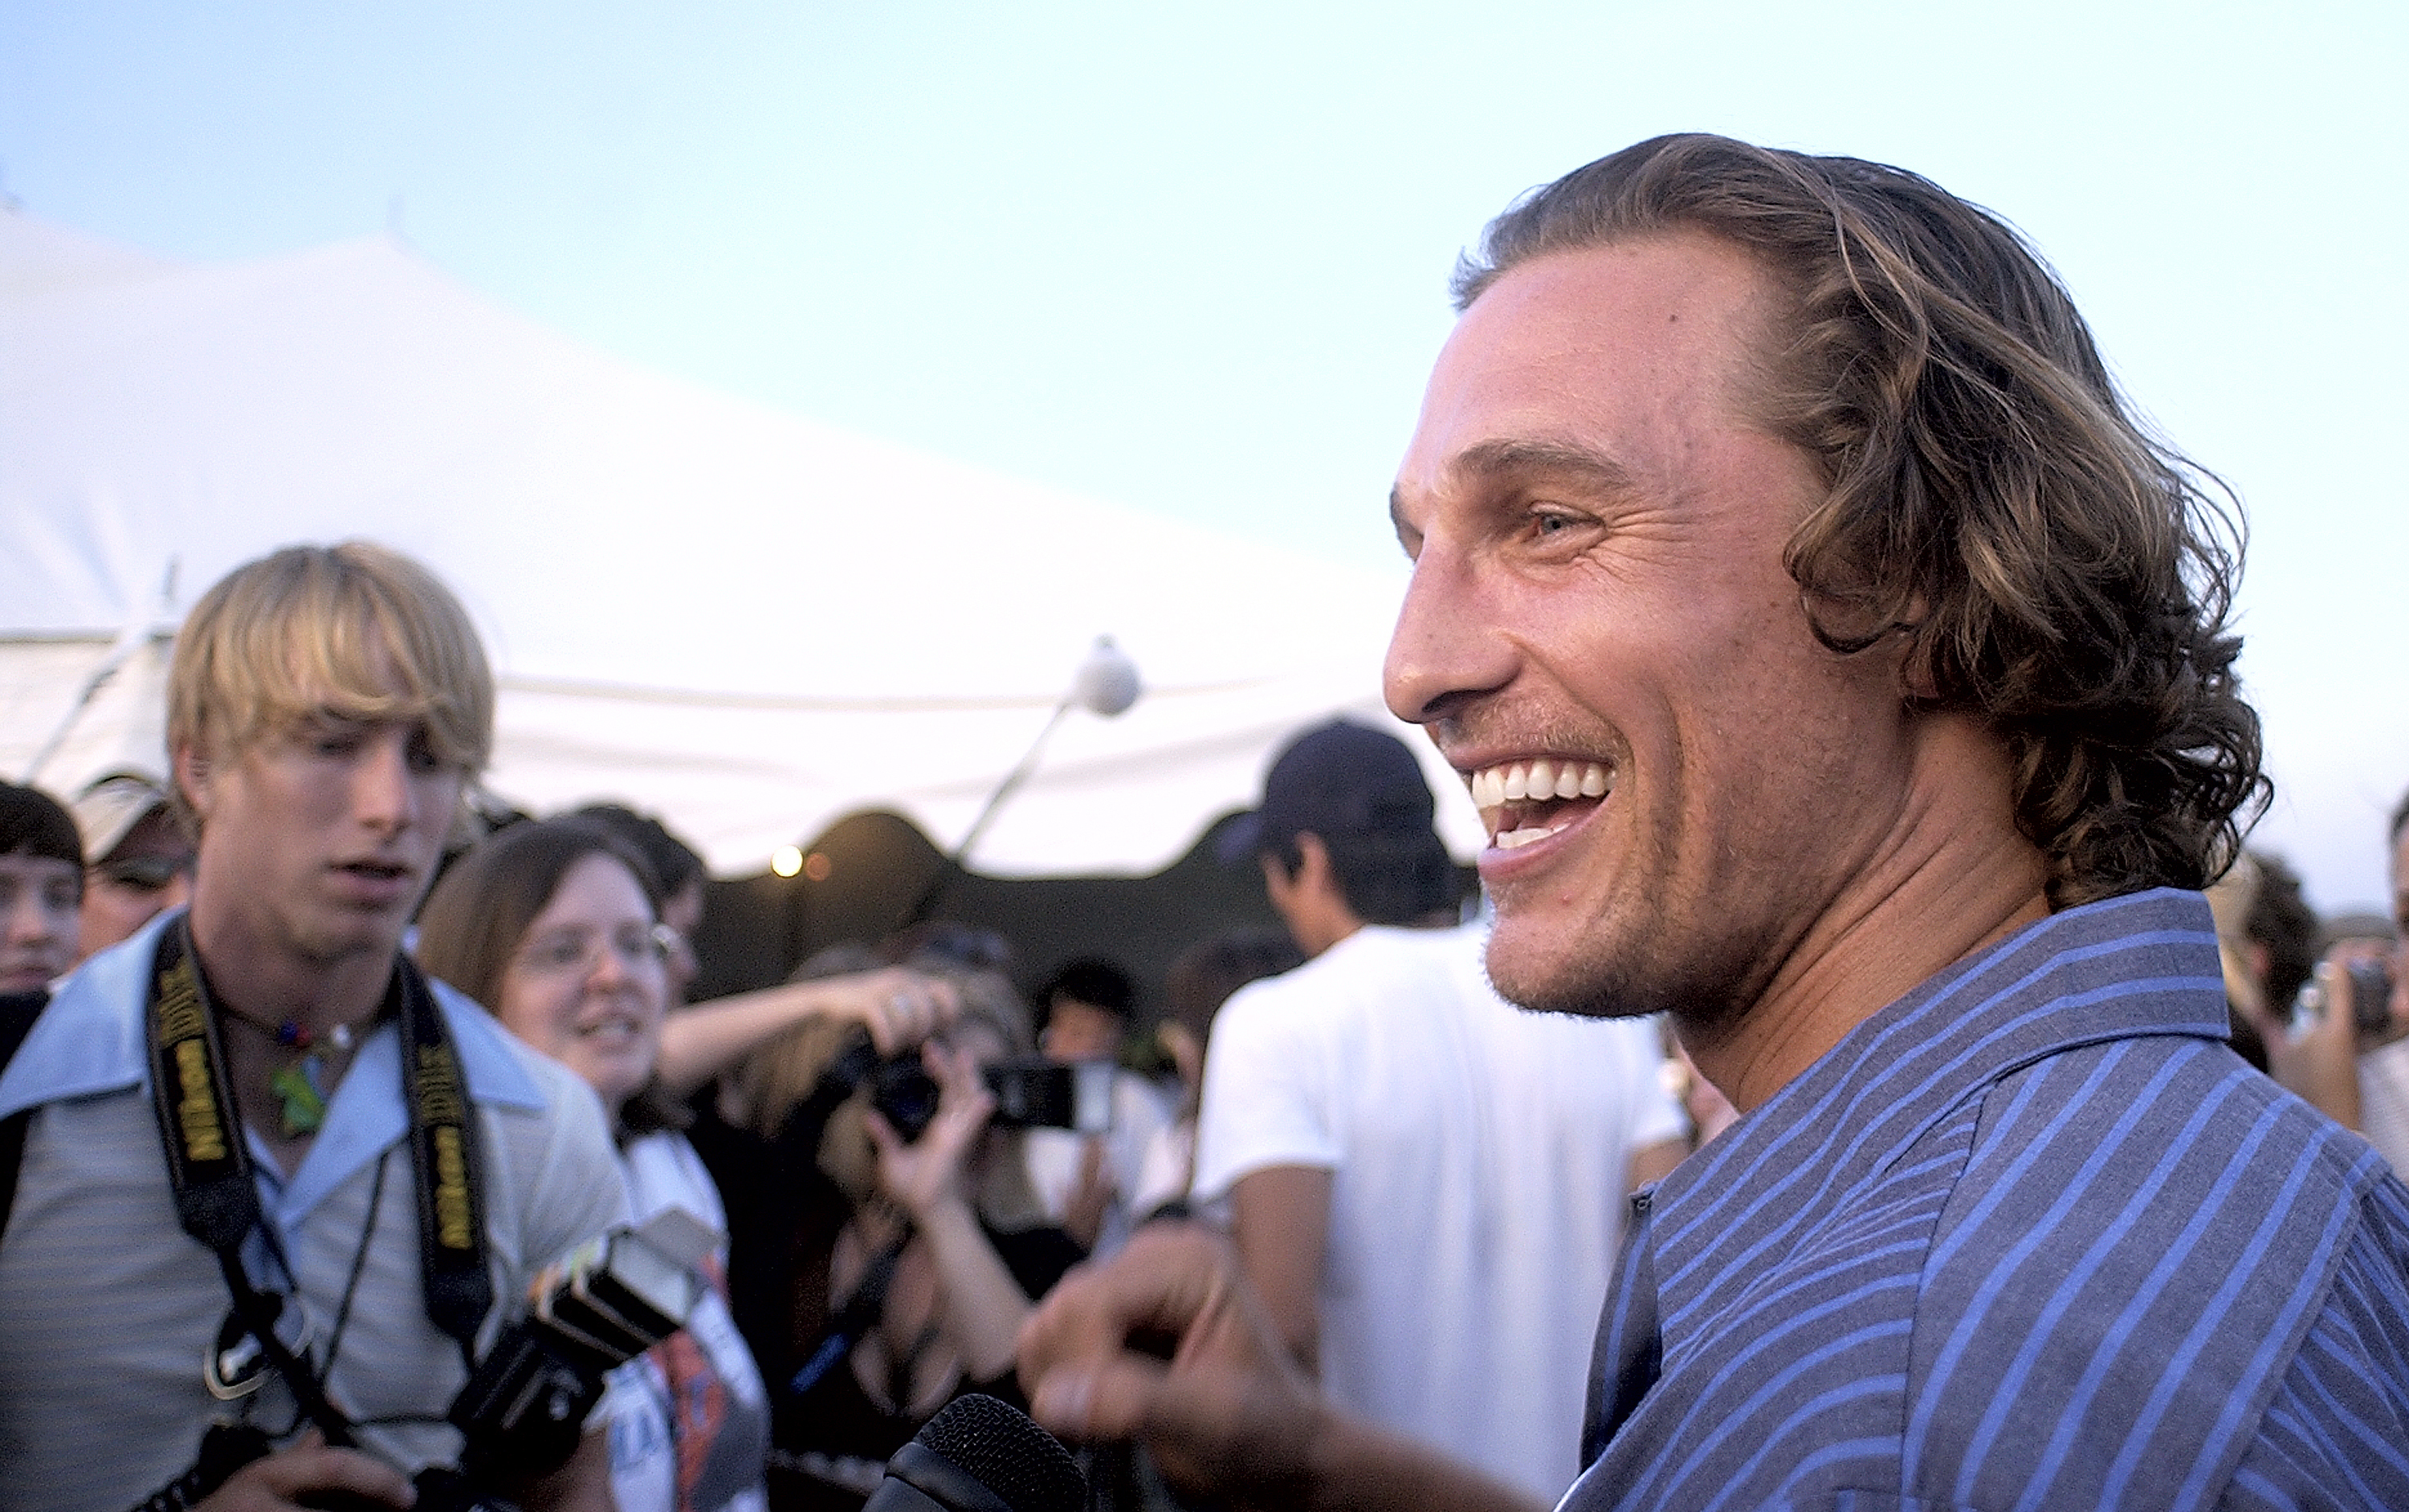 Matthew McConaughey at the 10th anniversary screening party of "Dazed and Confused" on May 31, 2003, in Austin, Texas. | Source: Getty Images